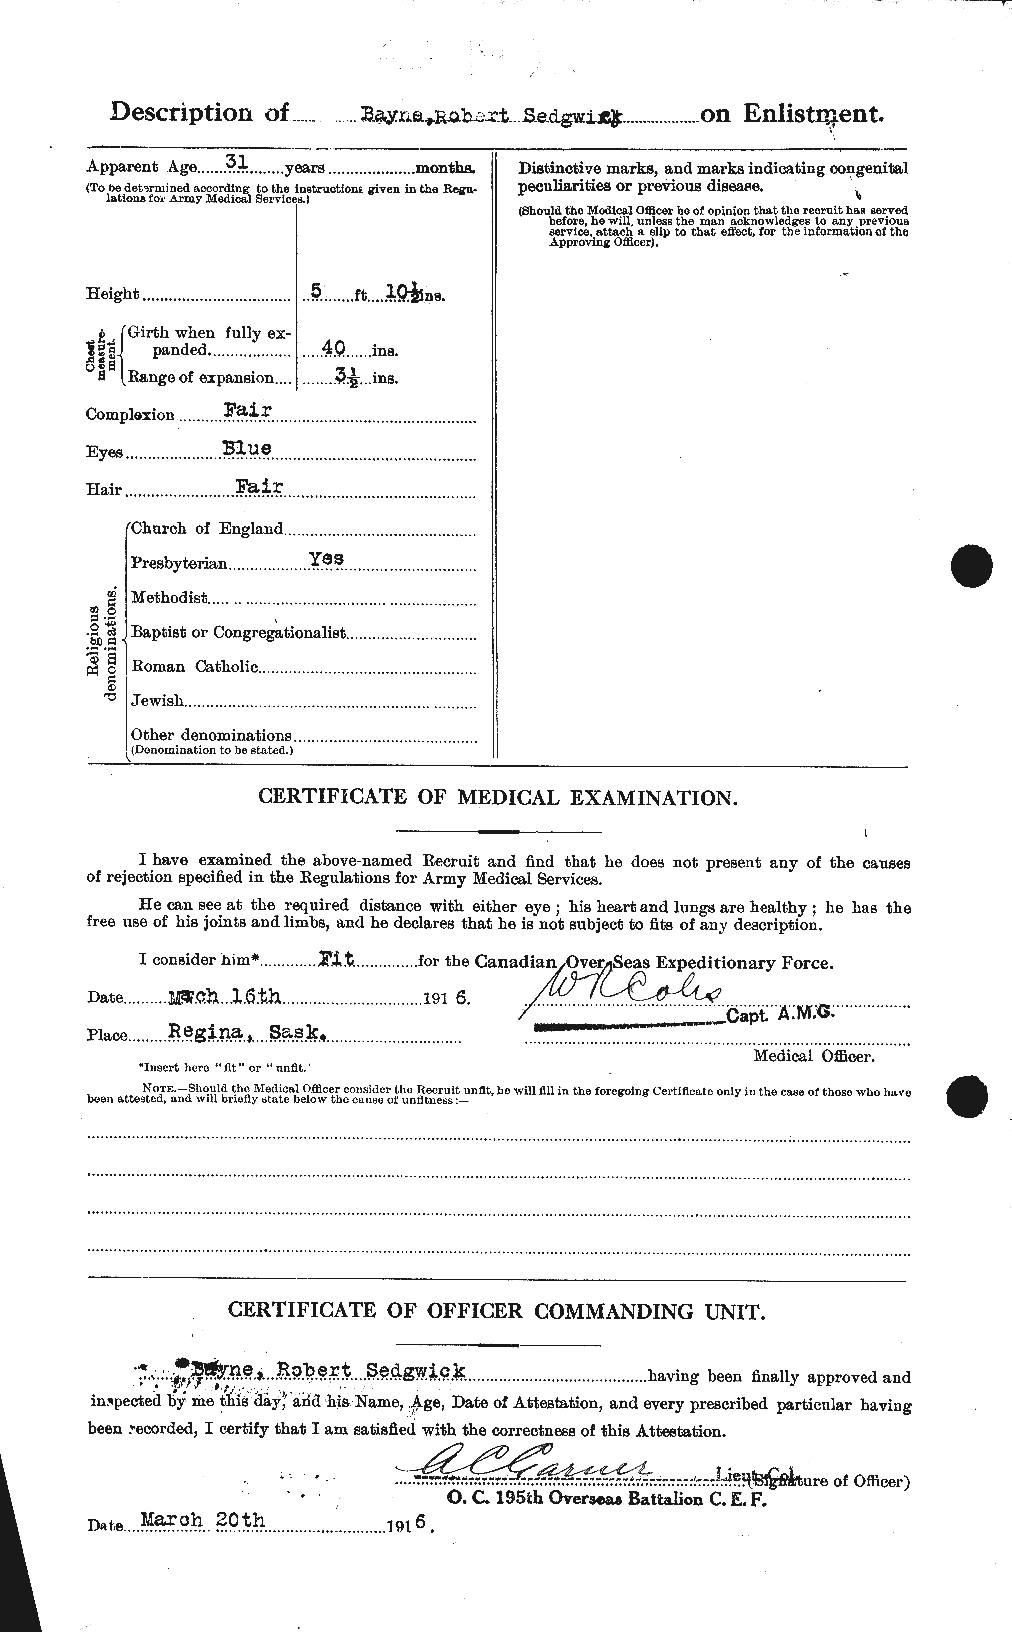 Personnel Records of the First World War - CEF 229774b